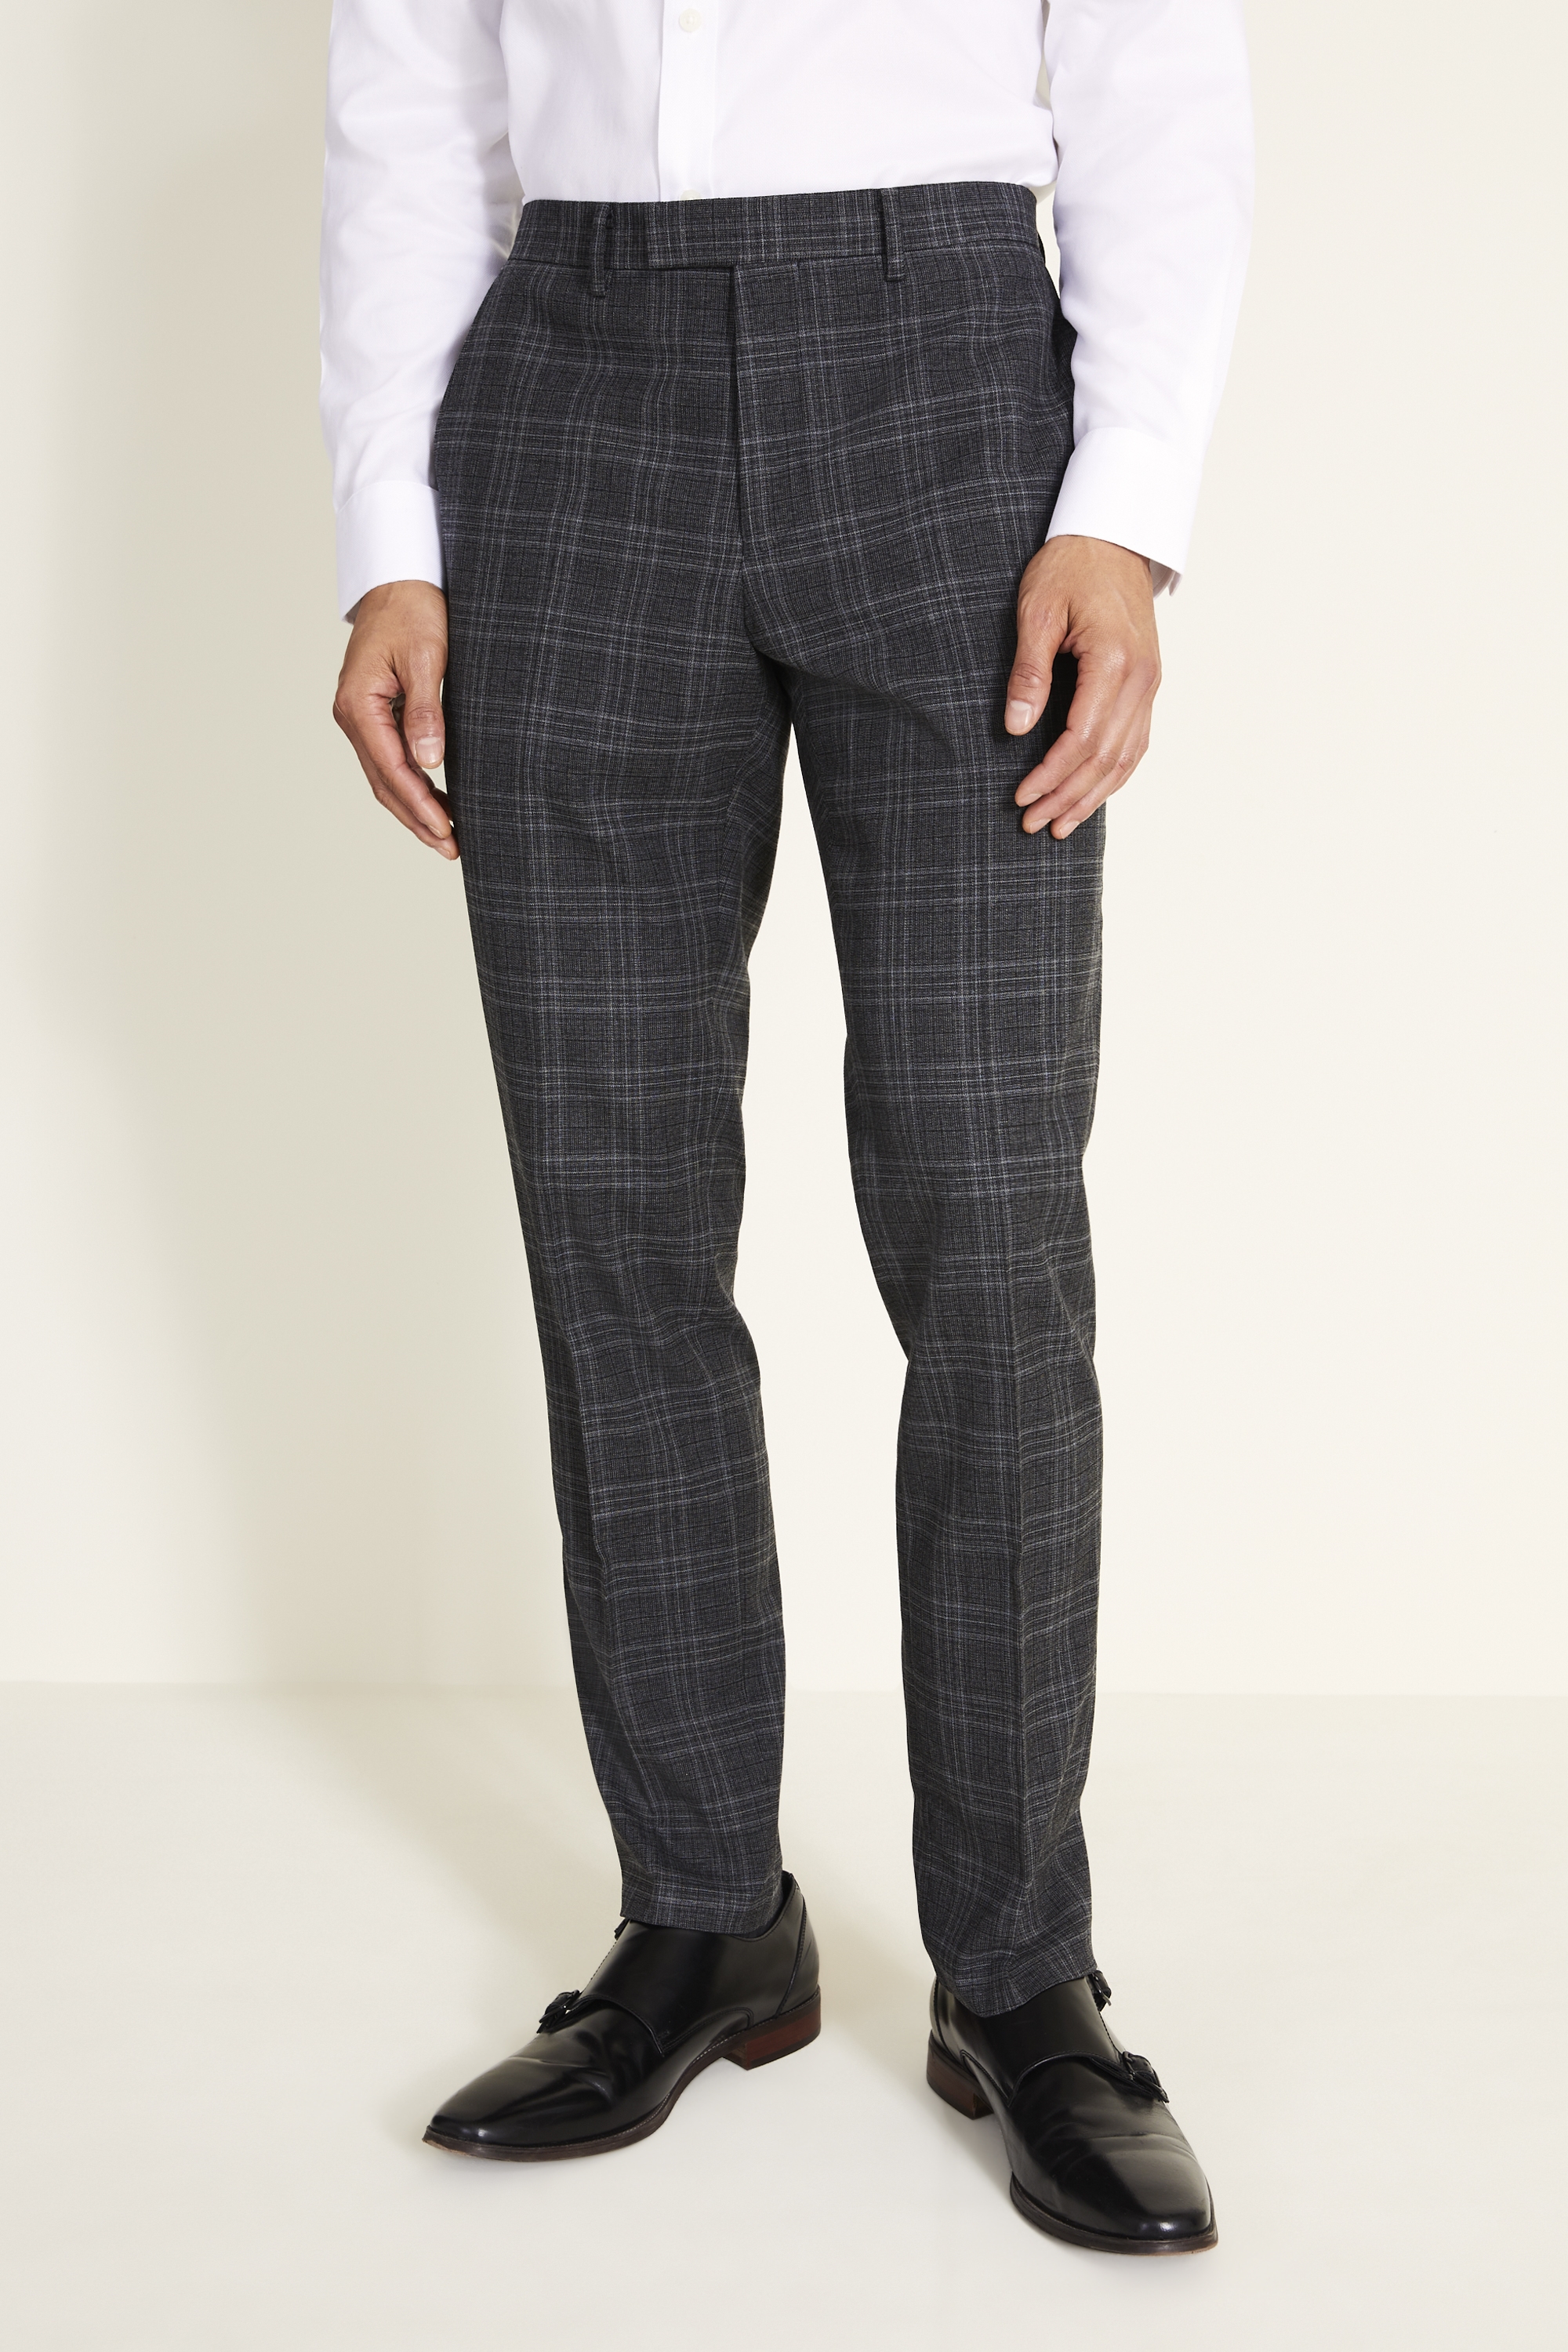 Tailored Fit Charcoal Check Trouser | Buy Online at Moss